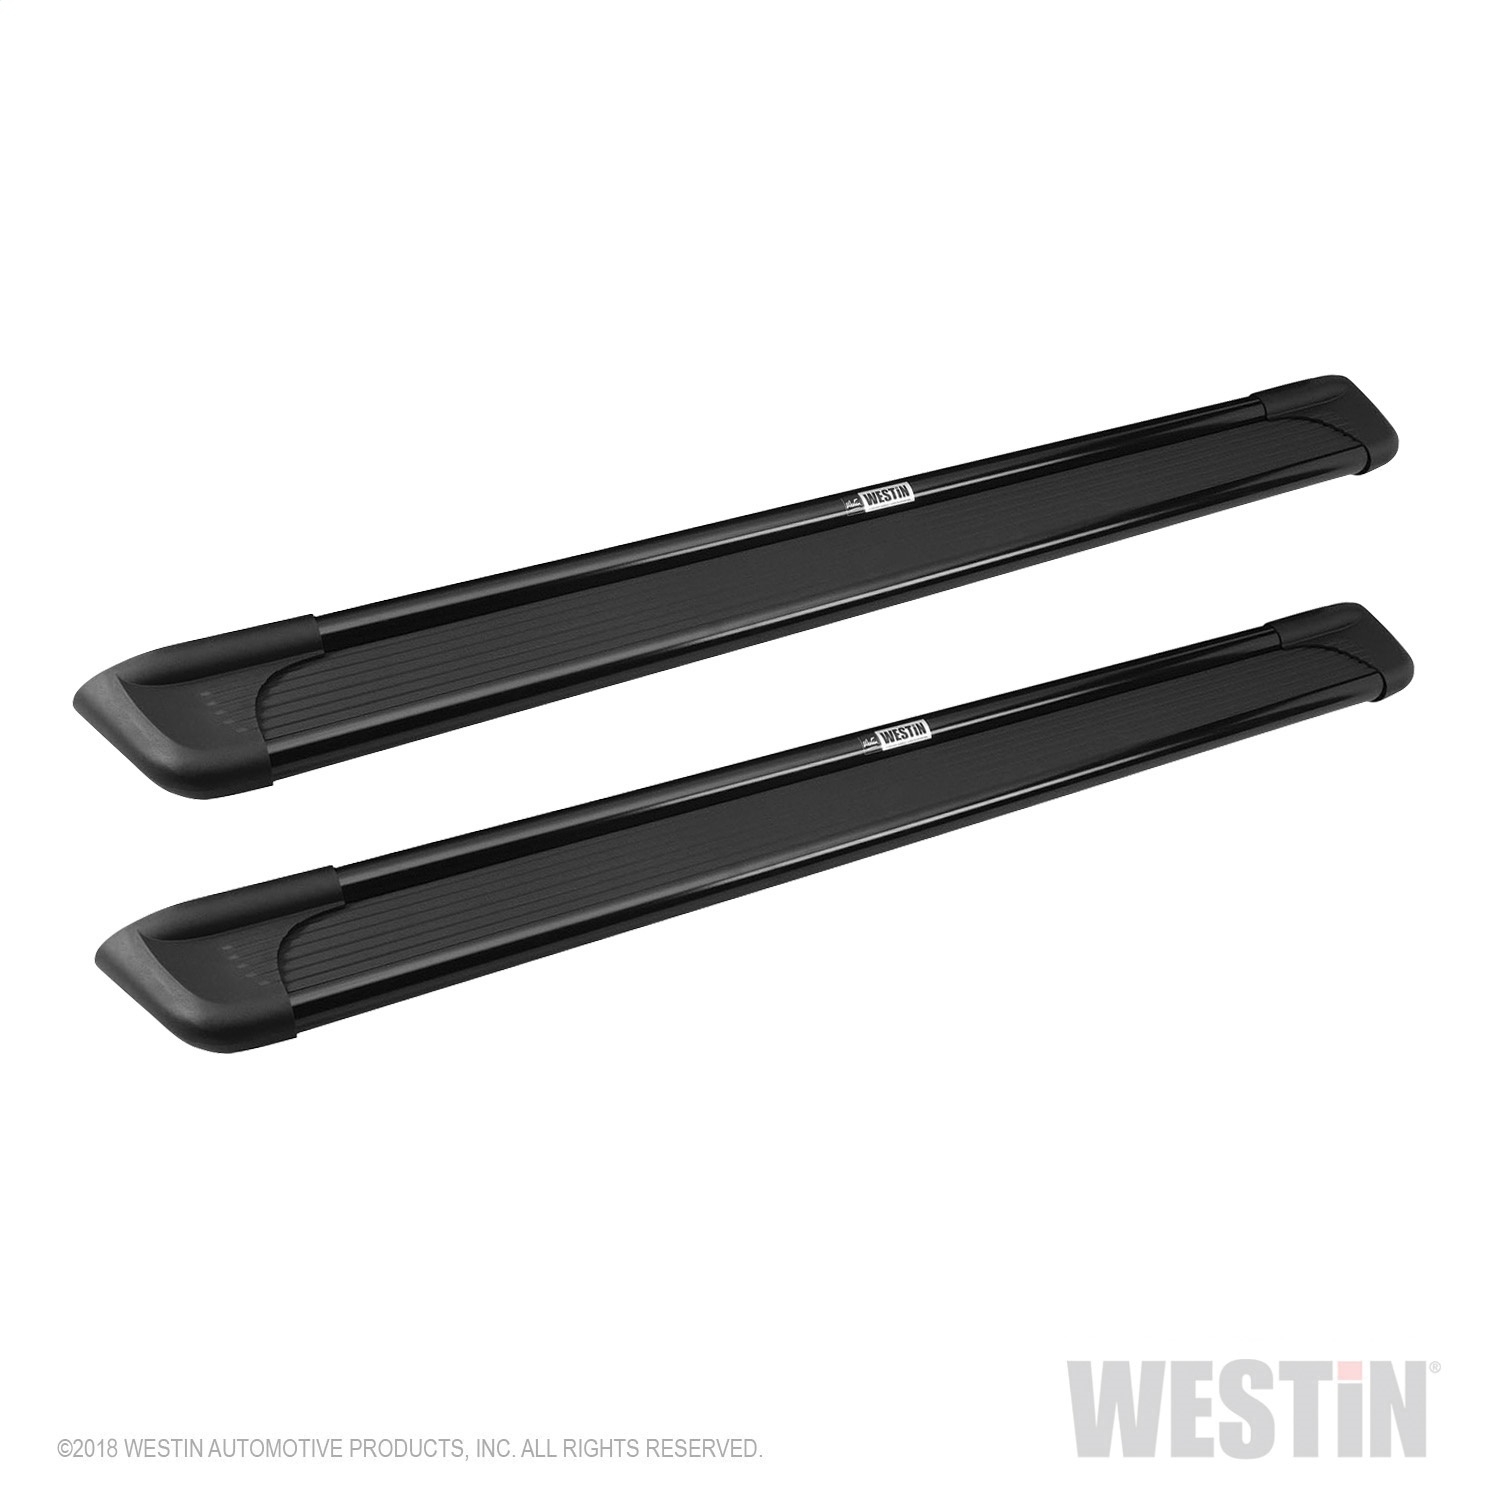 Westin Sure-Grip Running Boards, Black Aluminum, 69 In. Length, Does Not Include Mount Kit, Vehicle